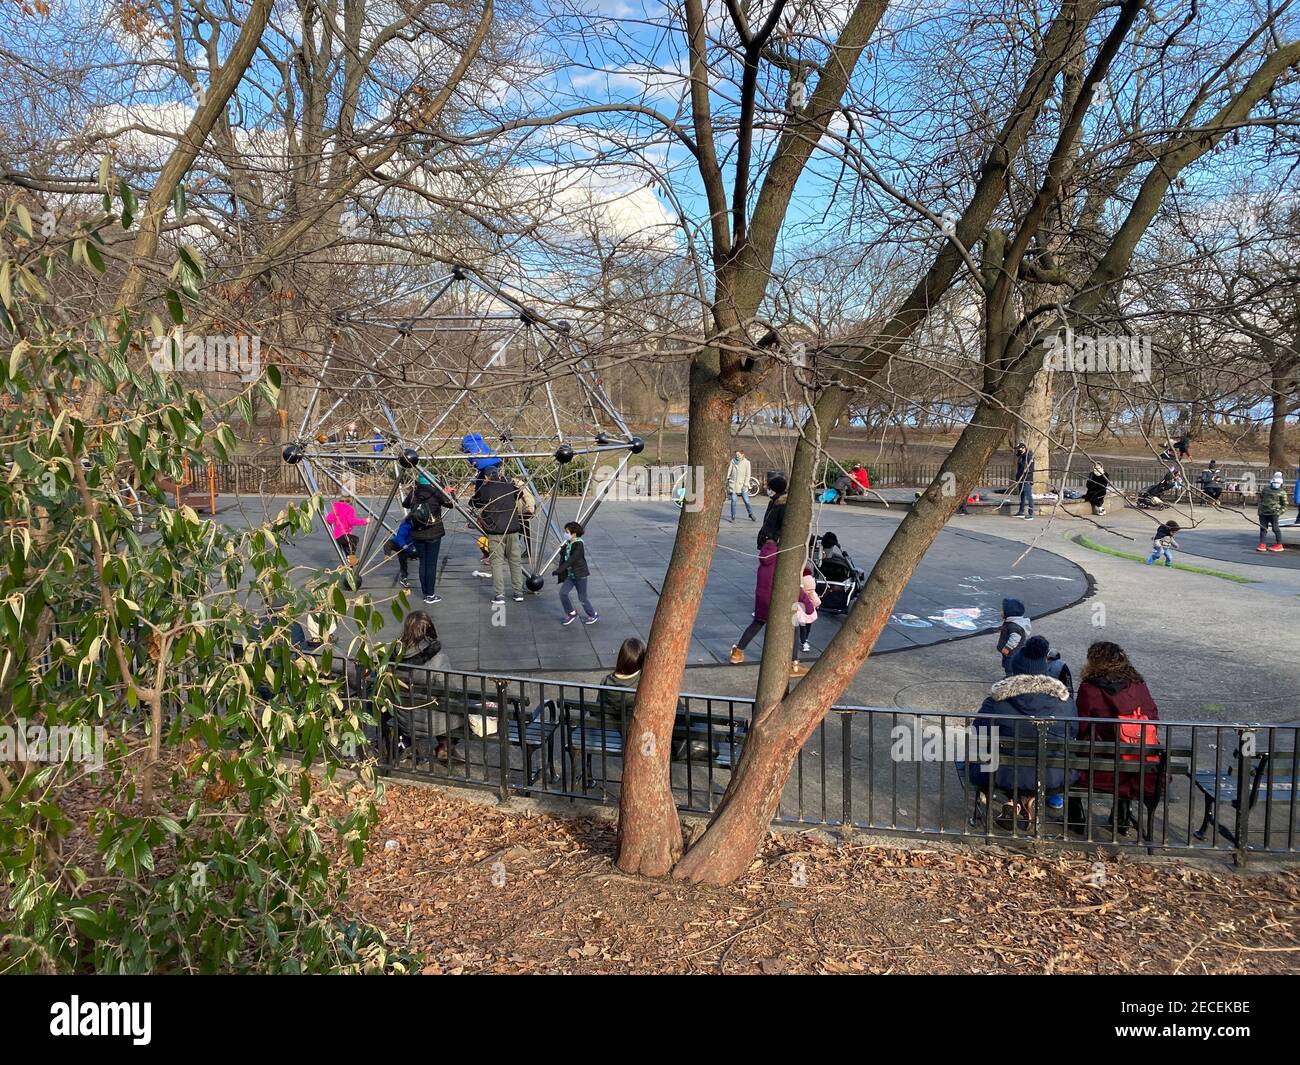 Parents and children get some fresh air at the Vanderbilt Playground in Prospect Park during the Covid-19 Pandemic when there are not many places to g Stock Photo